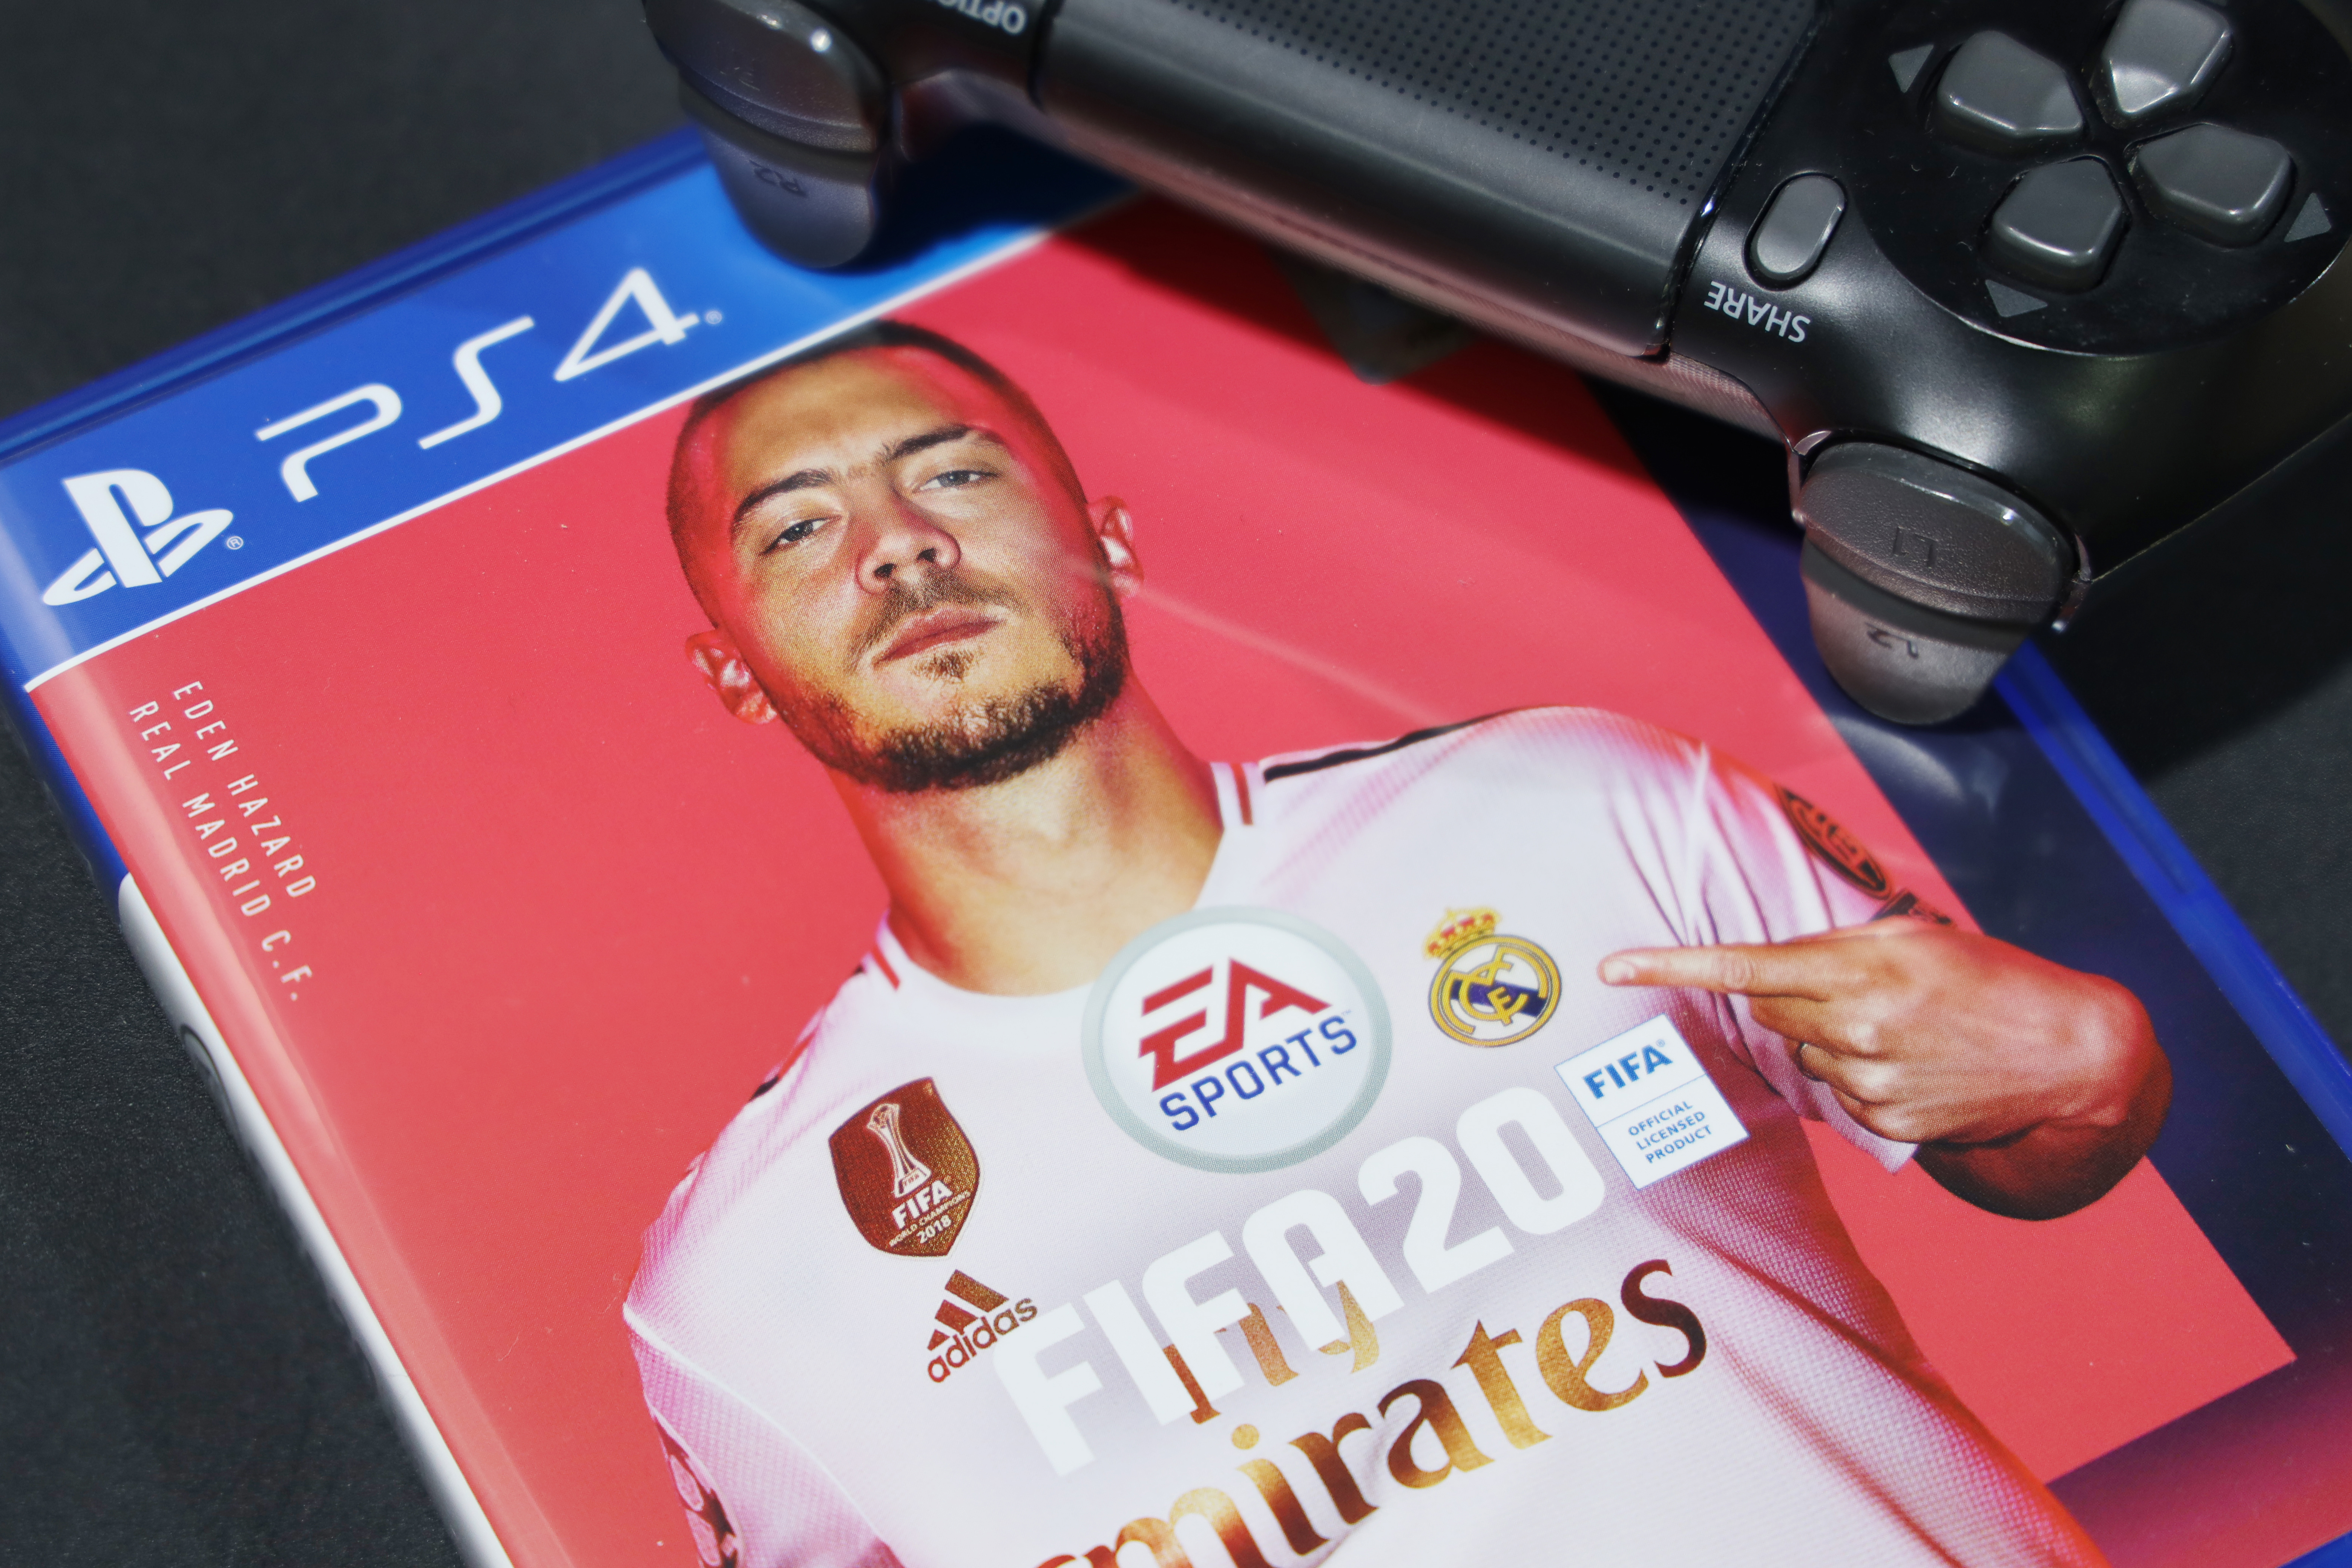 download play fifa 22 online for free